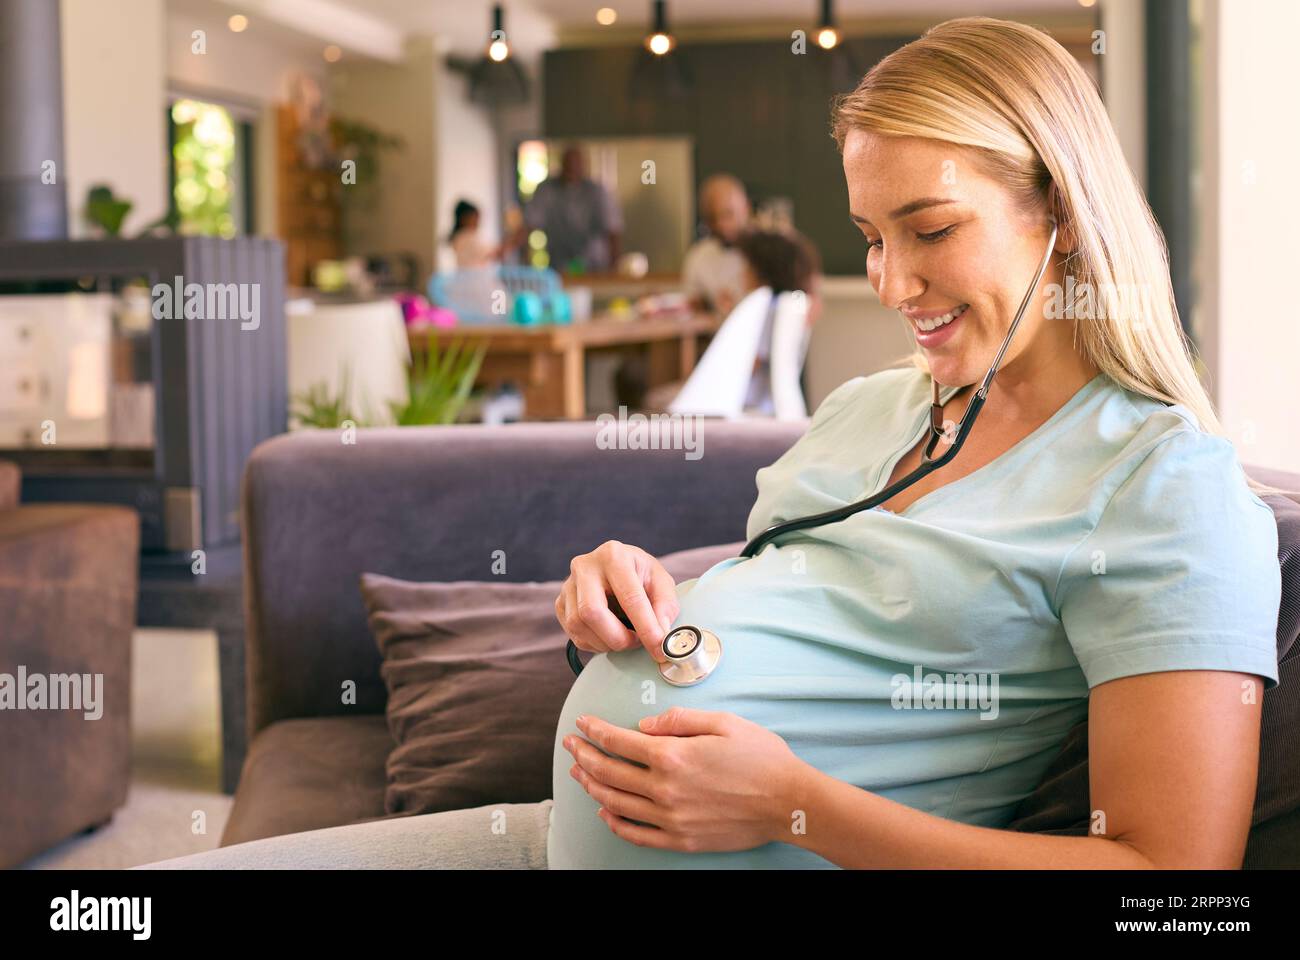 Pregnant Woman At Home Listening To Baby Heartbeat With Stethoscope Stock Photo